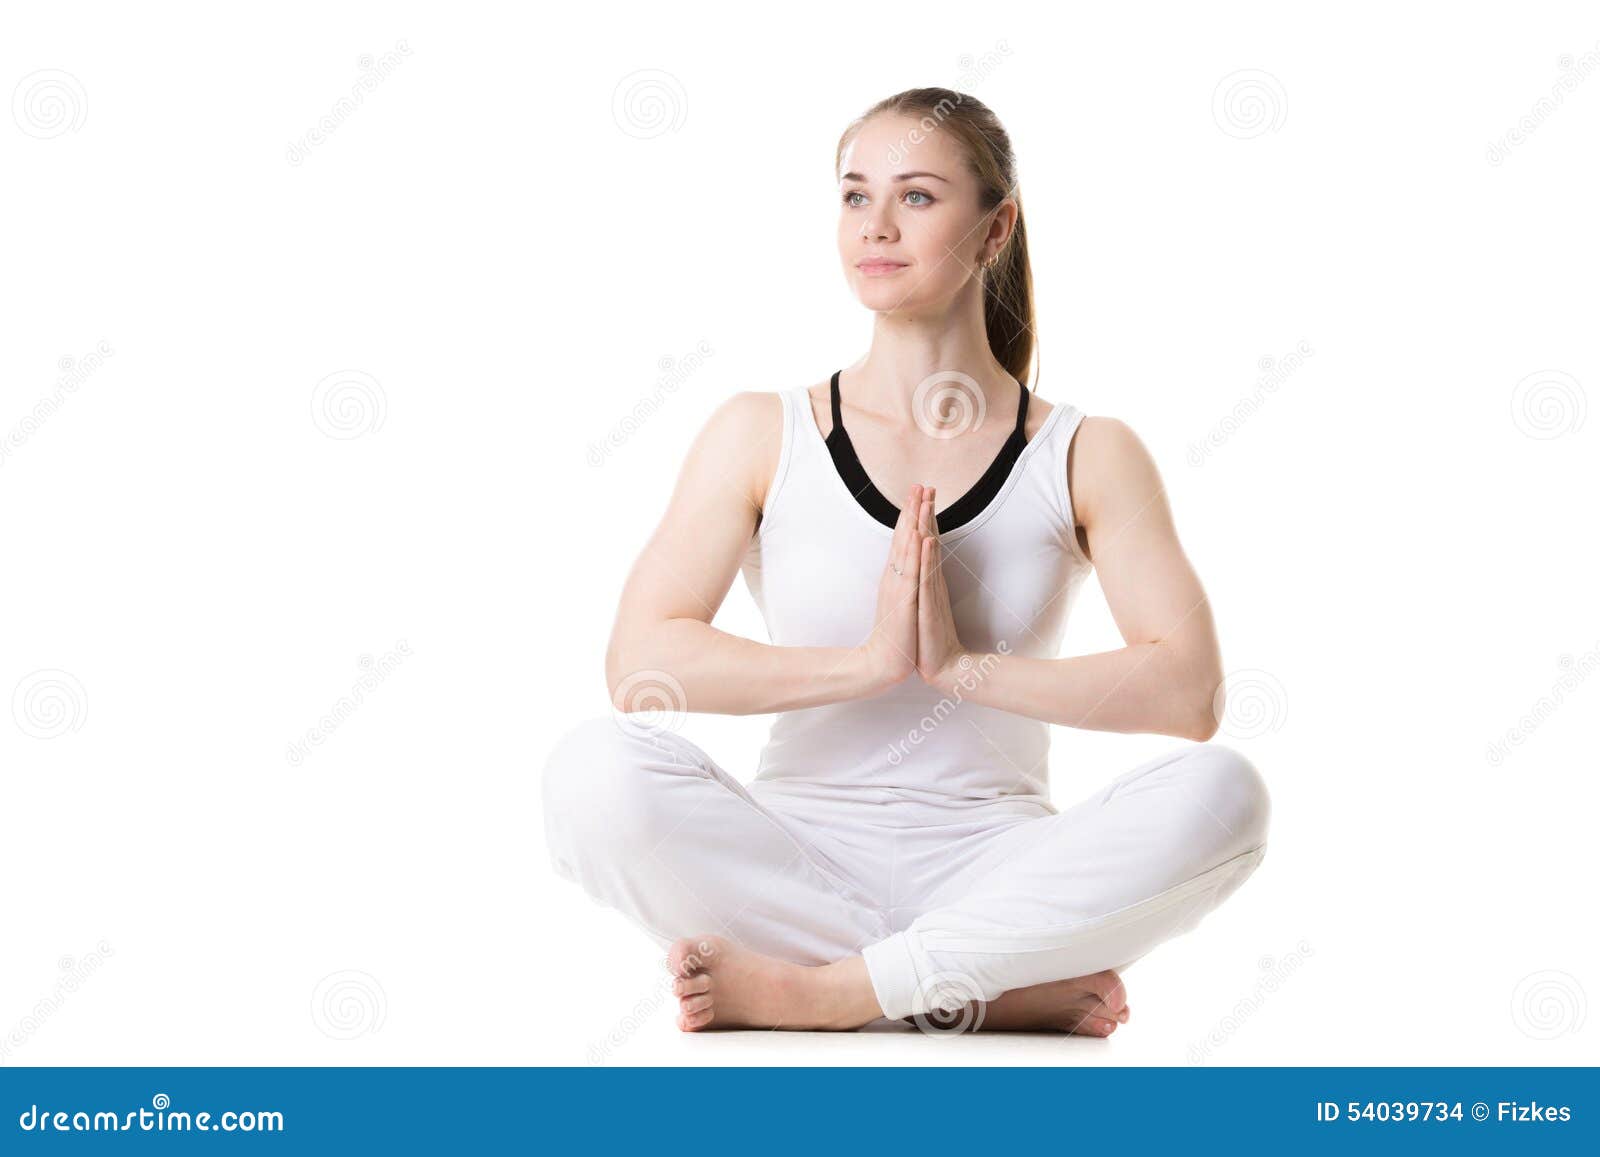 9 Yoga Poses to Reverse Bad Posture Caused by Sitting | Basic yoga poses, Easy  yoga poses, Bad posture